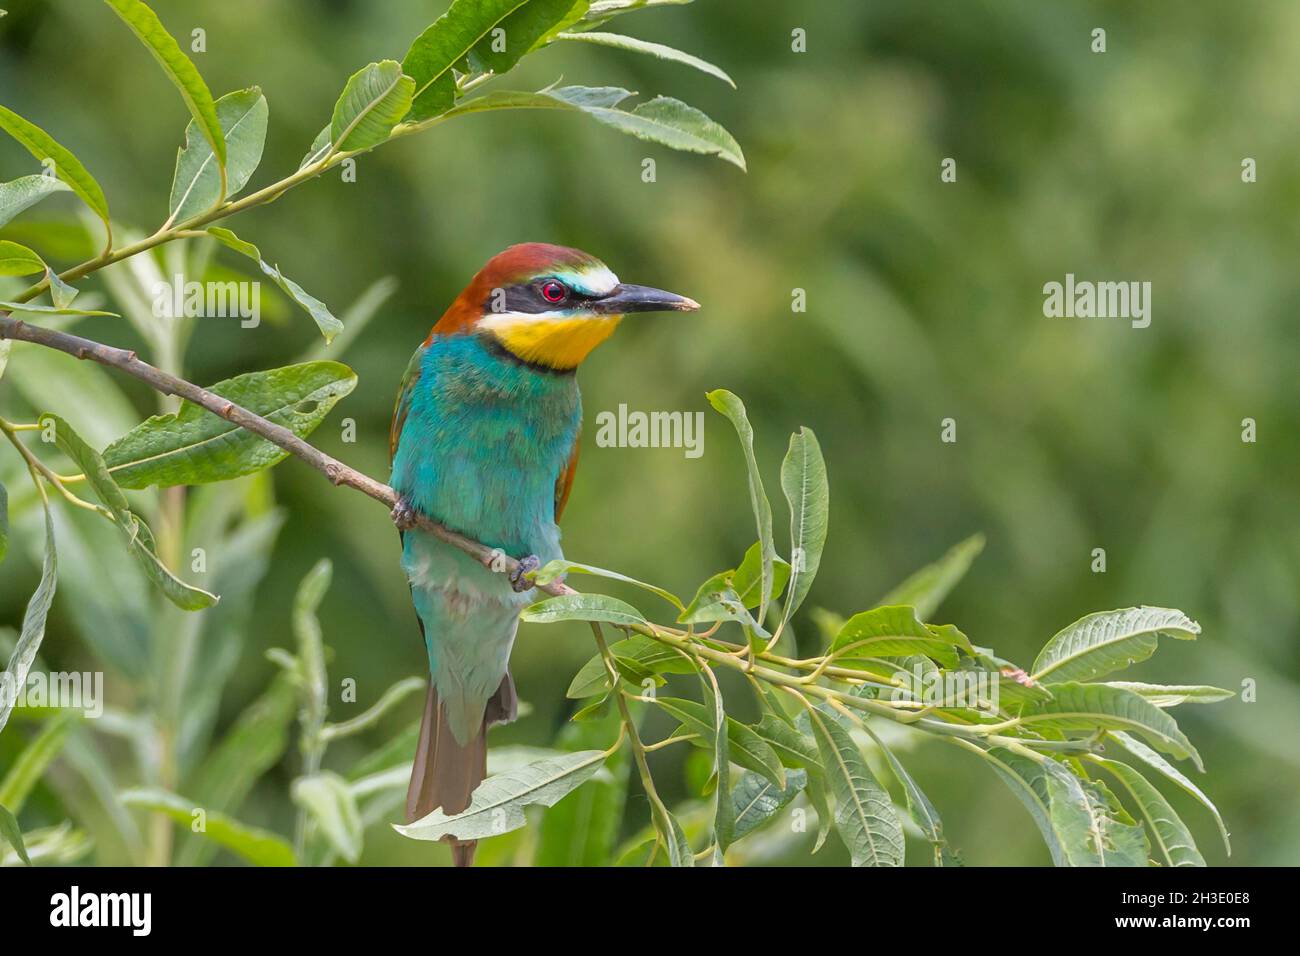 European bee eater (Merops apiaster), perched on a willow twig, Germany Stock Photo